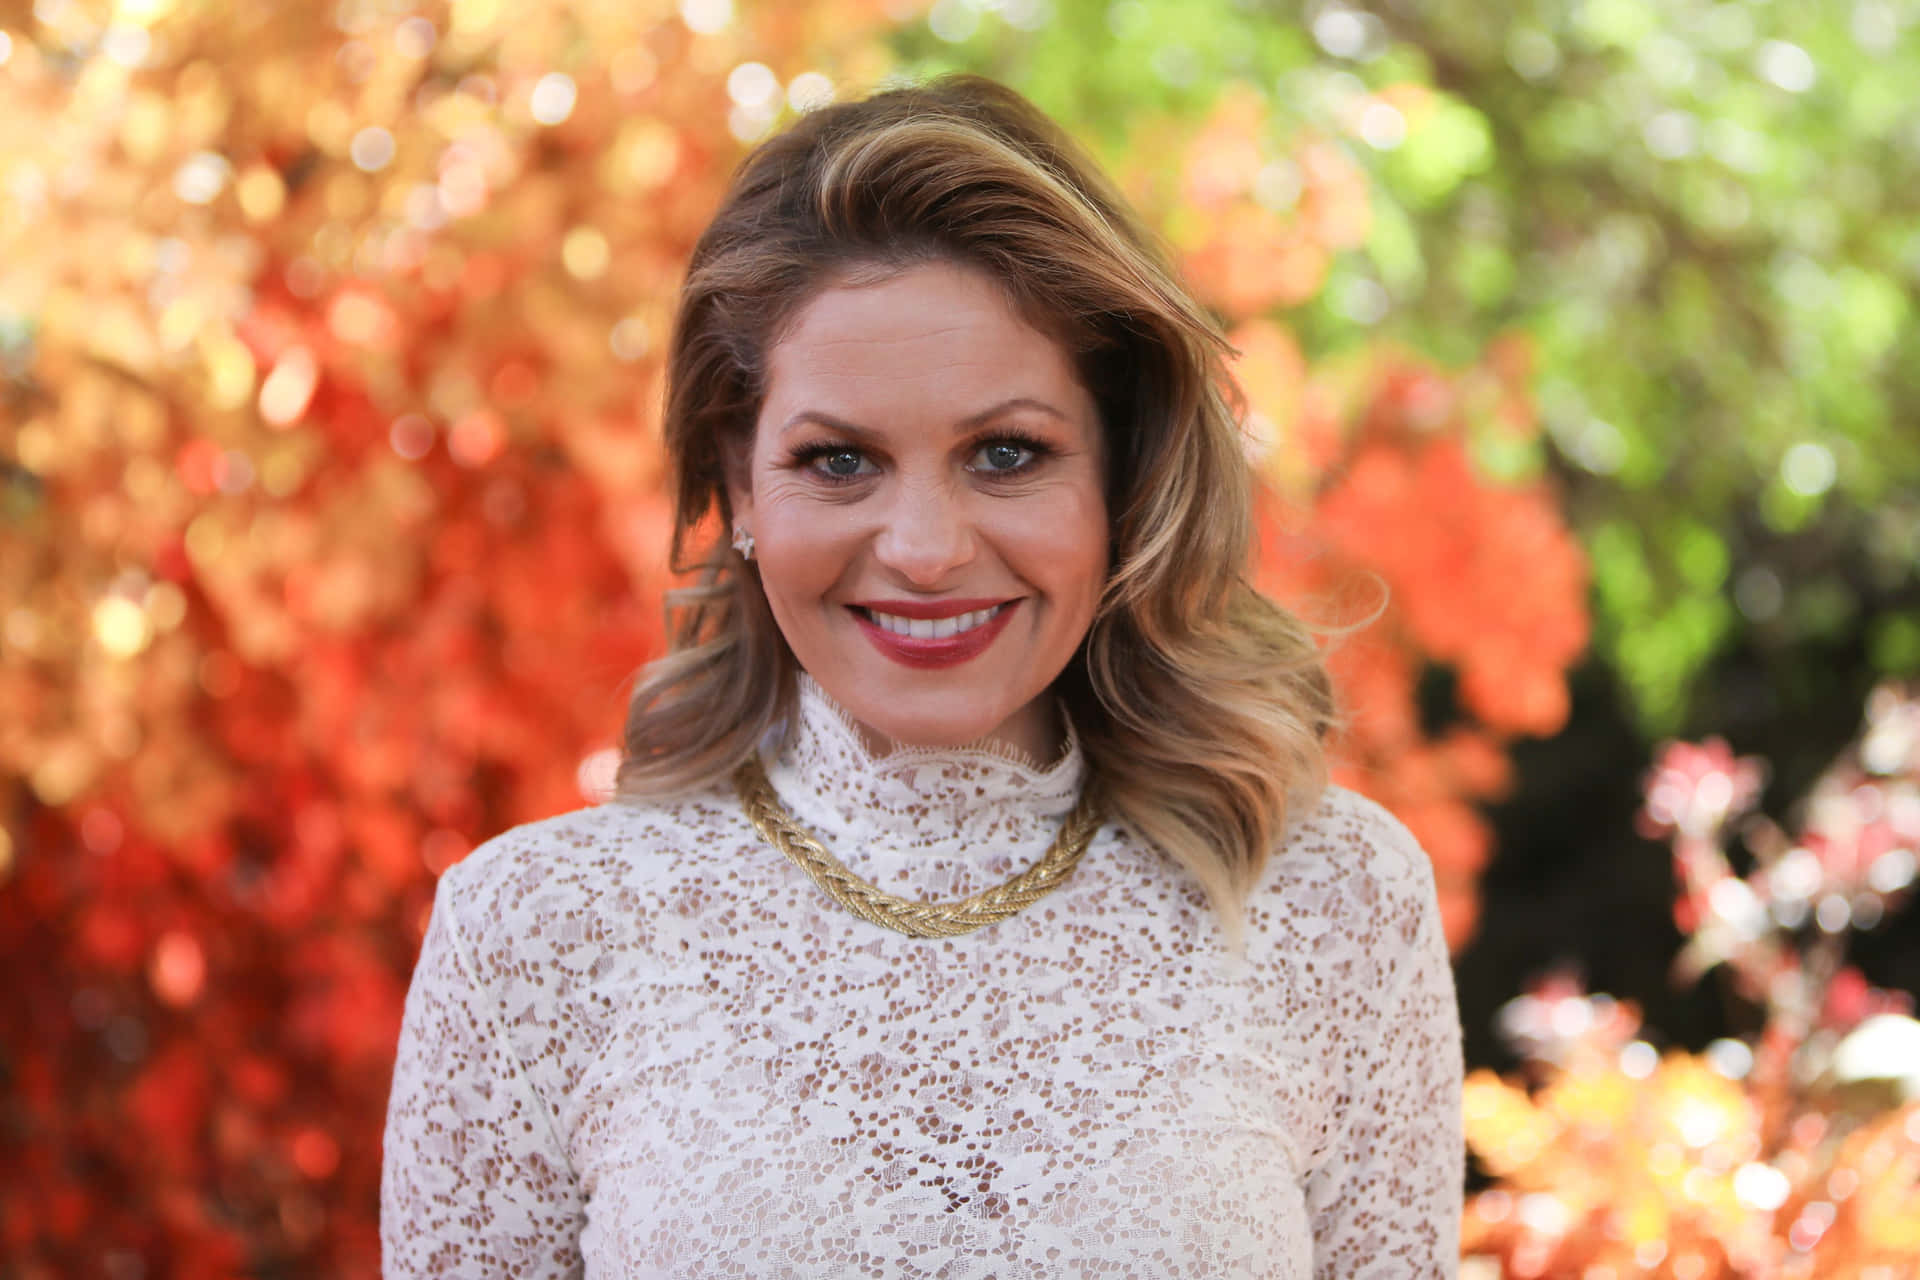 Candace Cameron Bure On A Red Carpet Event